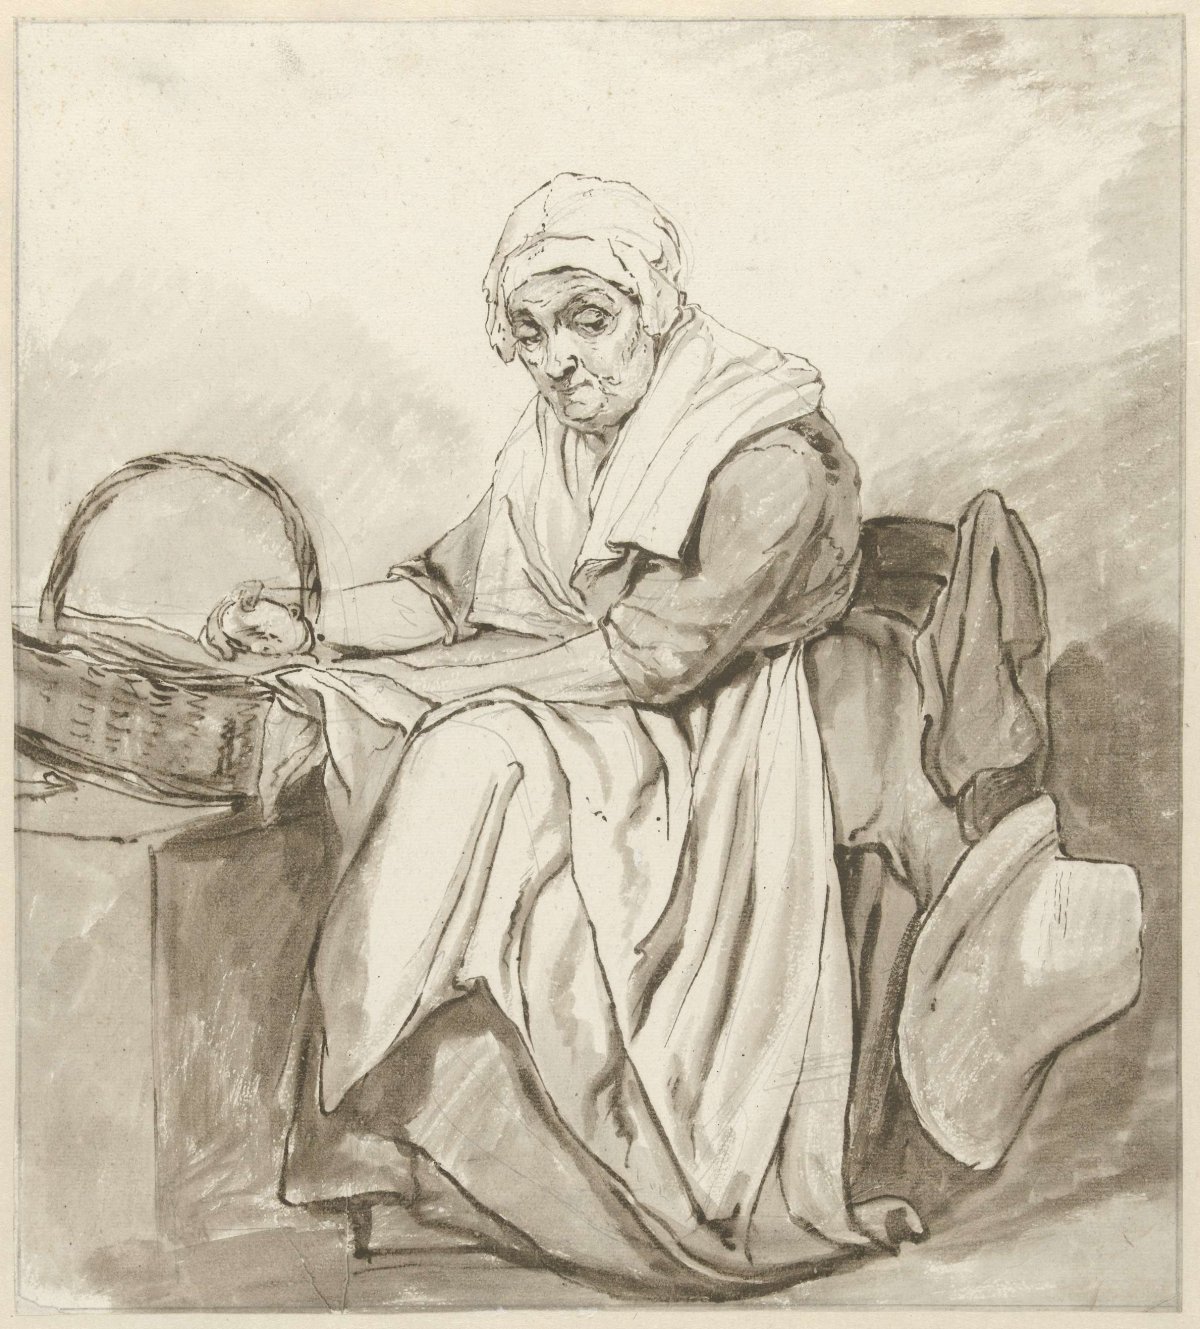 Study of a seated old woman with a man, Abraham van Strij (I), 1763 - 1826